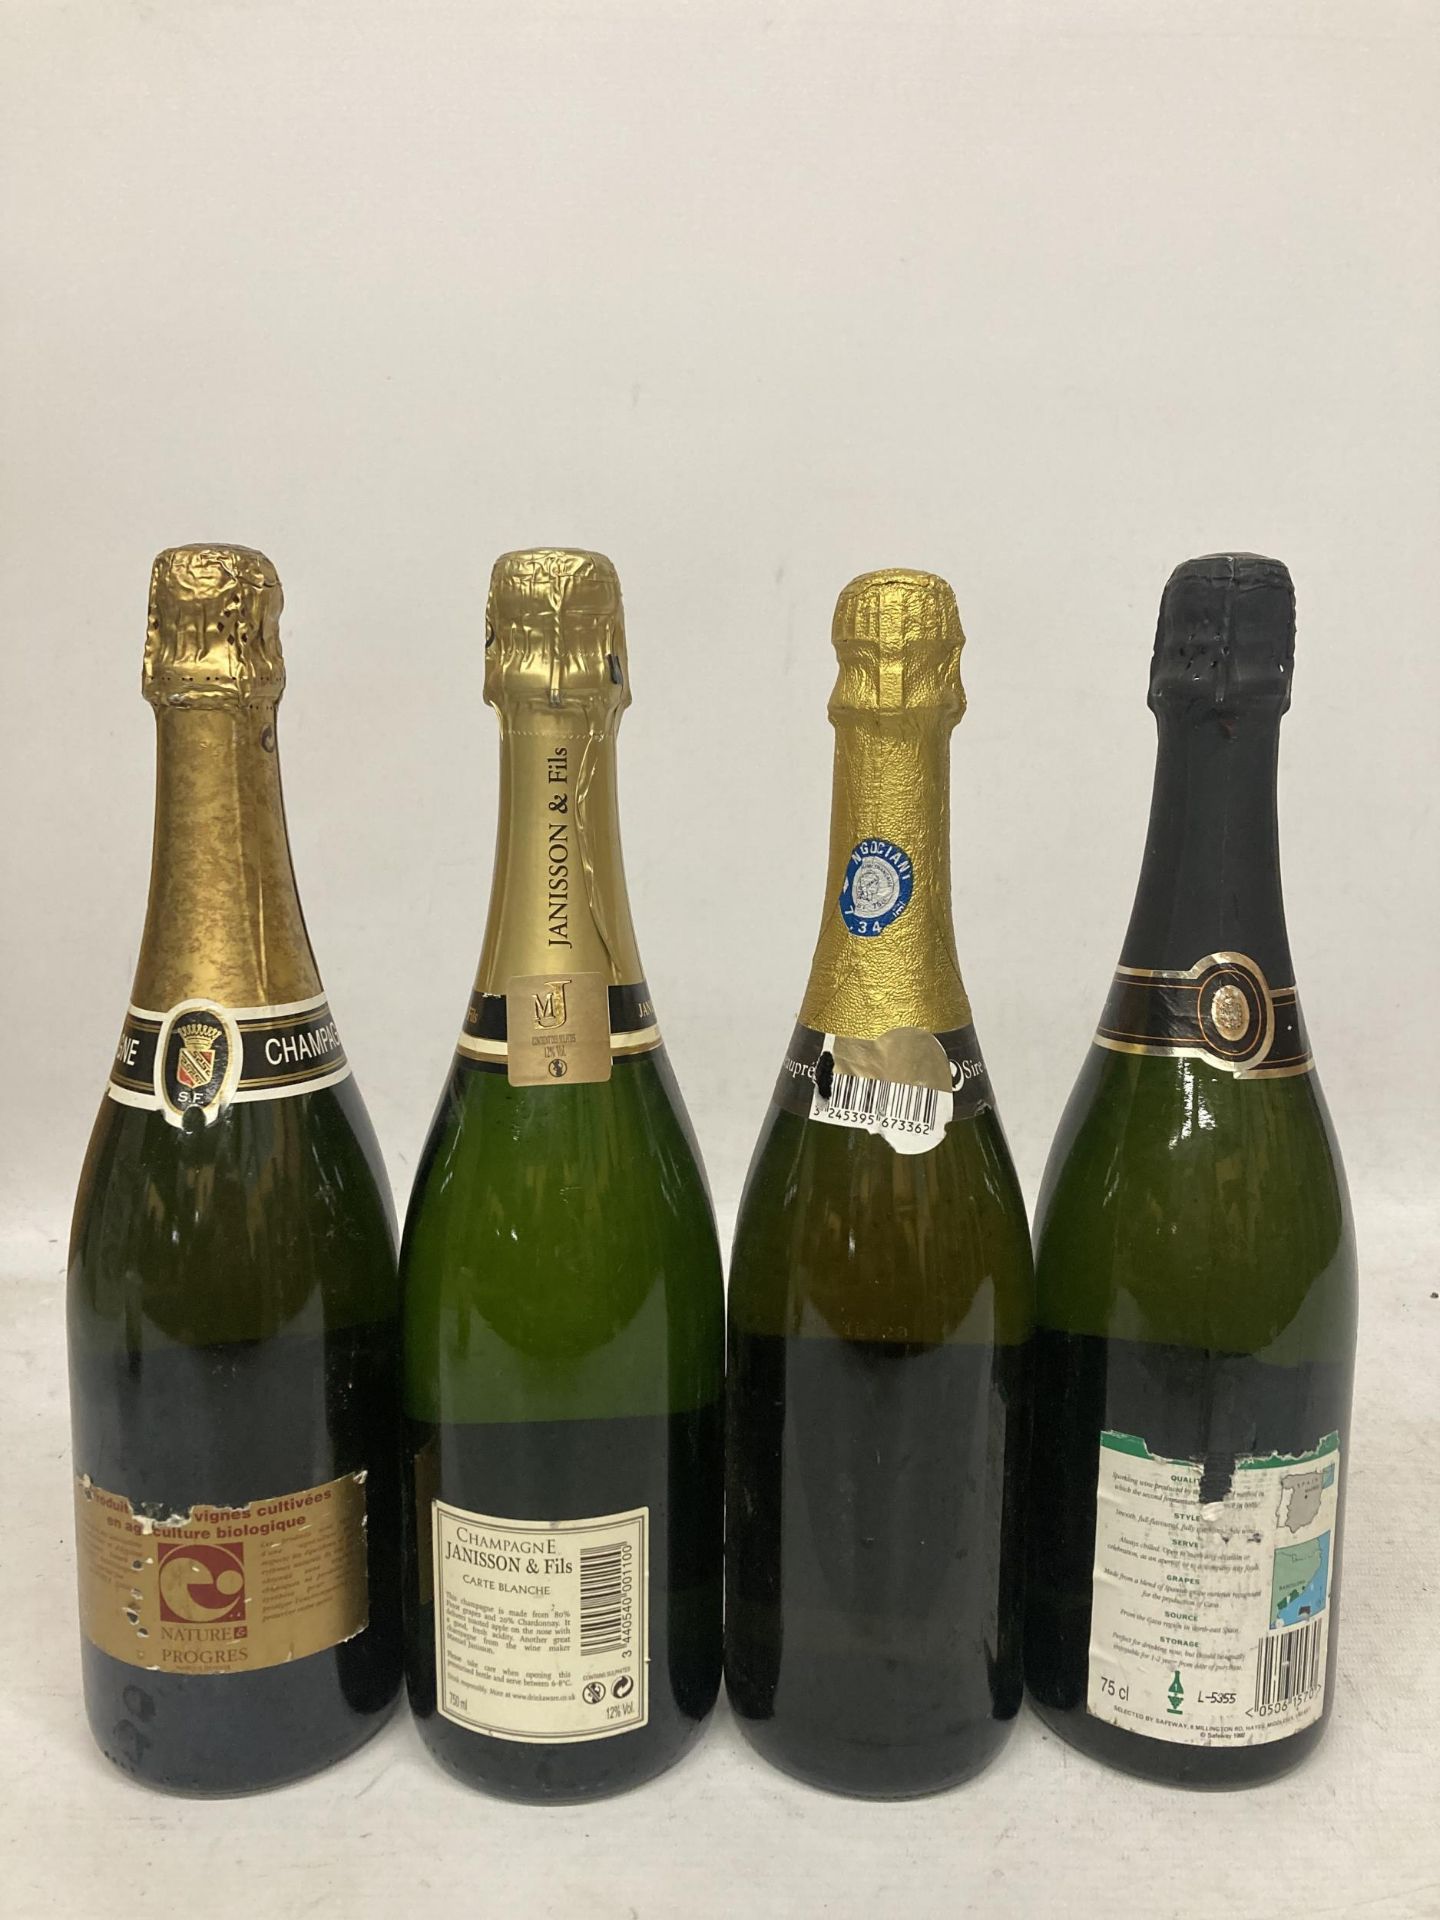 FOUR 75CL BOTTLES - SIRE DE BEAUPRE BRUT, JANISSON & FILS CHAMPAGNE, CAVA AND CHAMPAGNE - Image 2 of 2